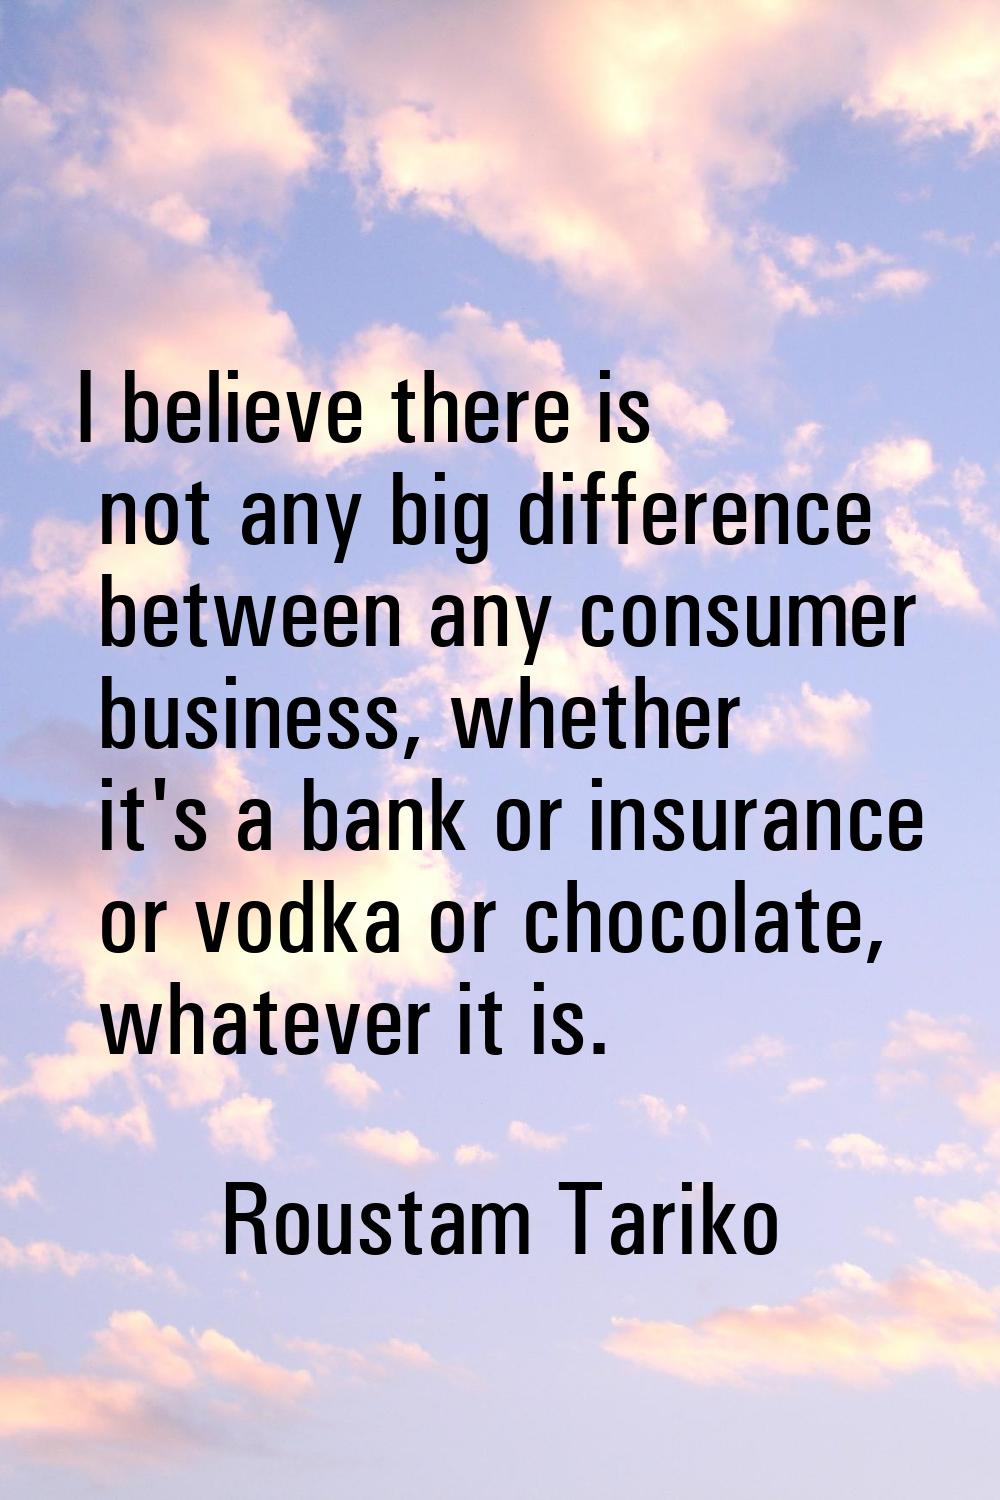 I believe there is not any big difference between any consumer business, whether it's a bank or ins